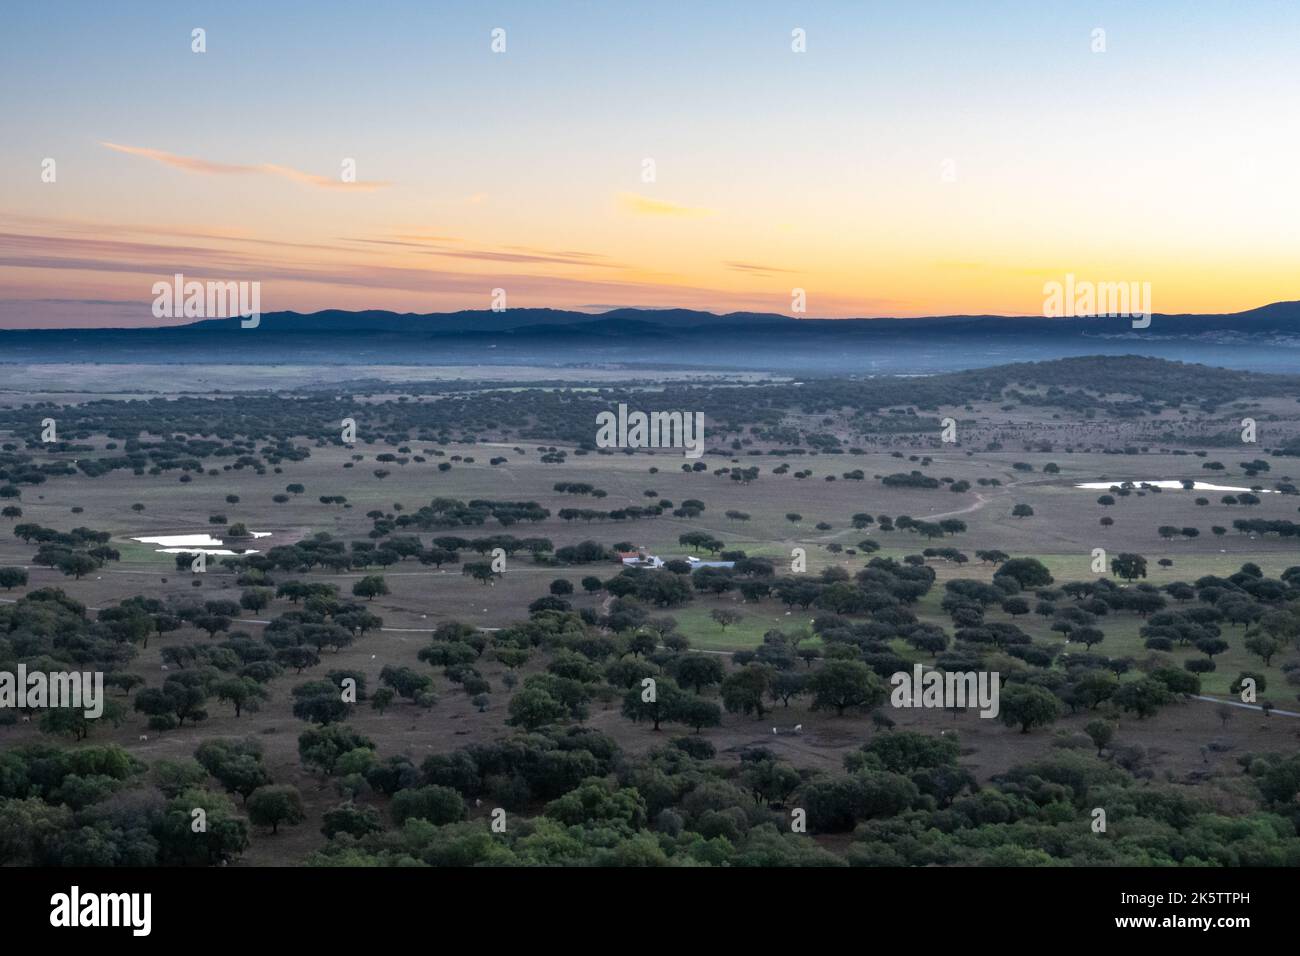 Silhouette at dawn of mountains bordering Spain overlooking the rural agricultural fields in Alentejo Portugal Stock Photo